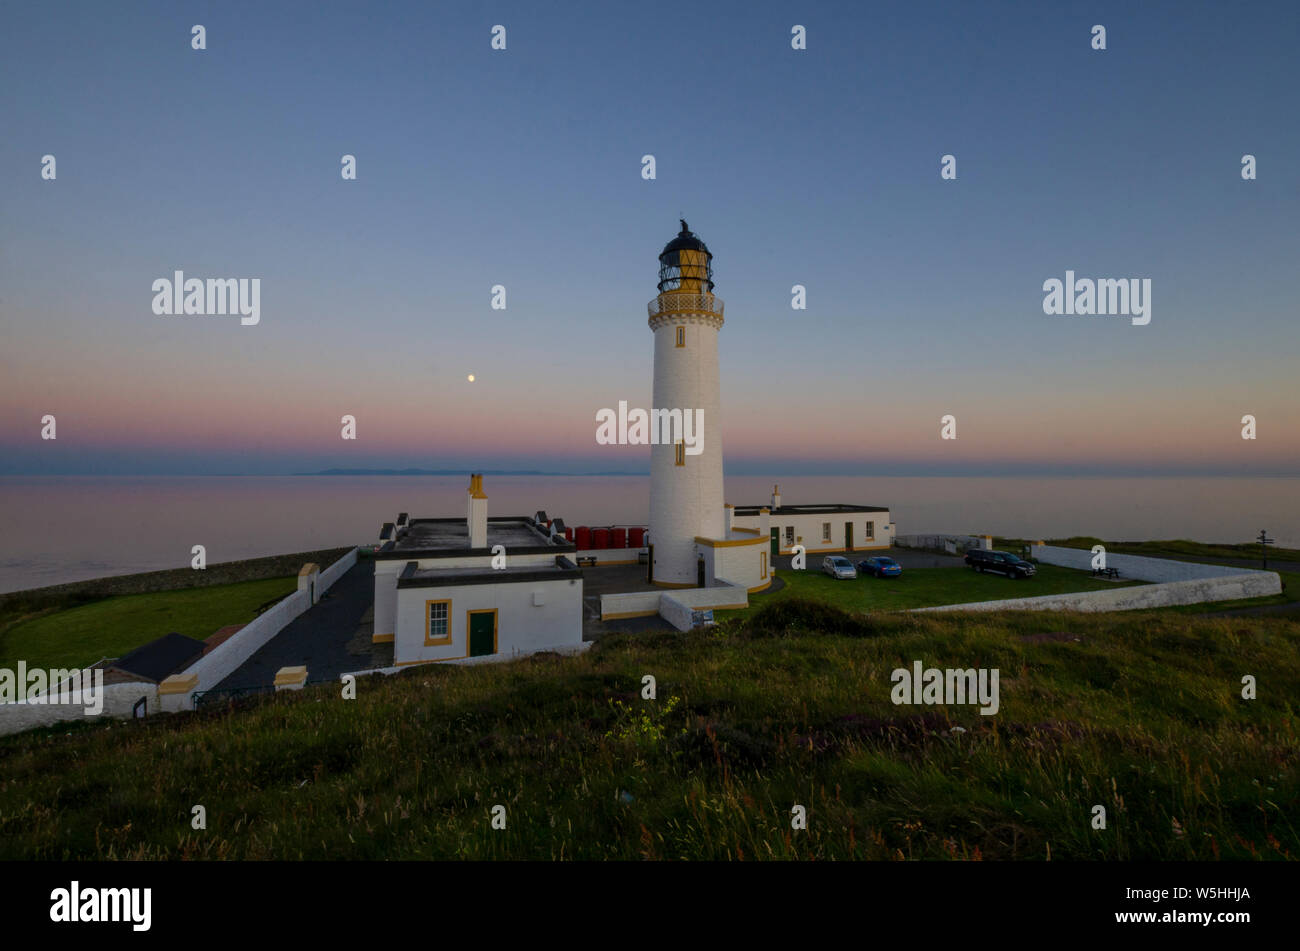 Dusk landscape of the lighthouse at the Mull of Galloway Dumfries and Galloway Scotland UK Stock Photo